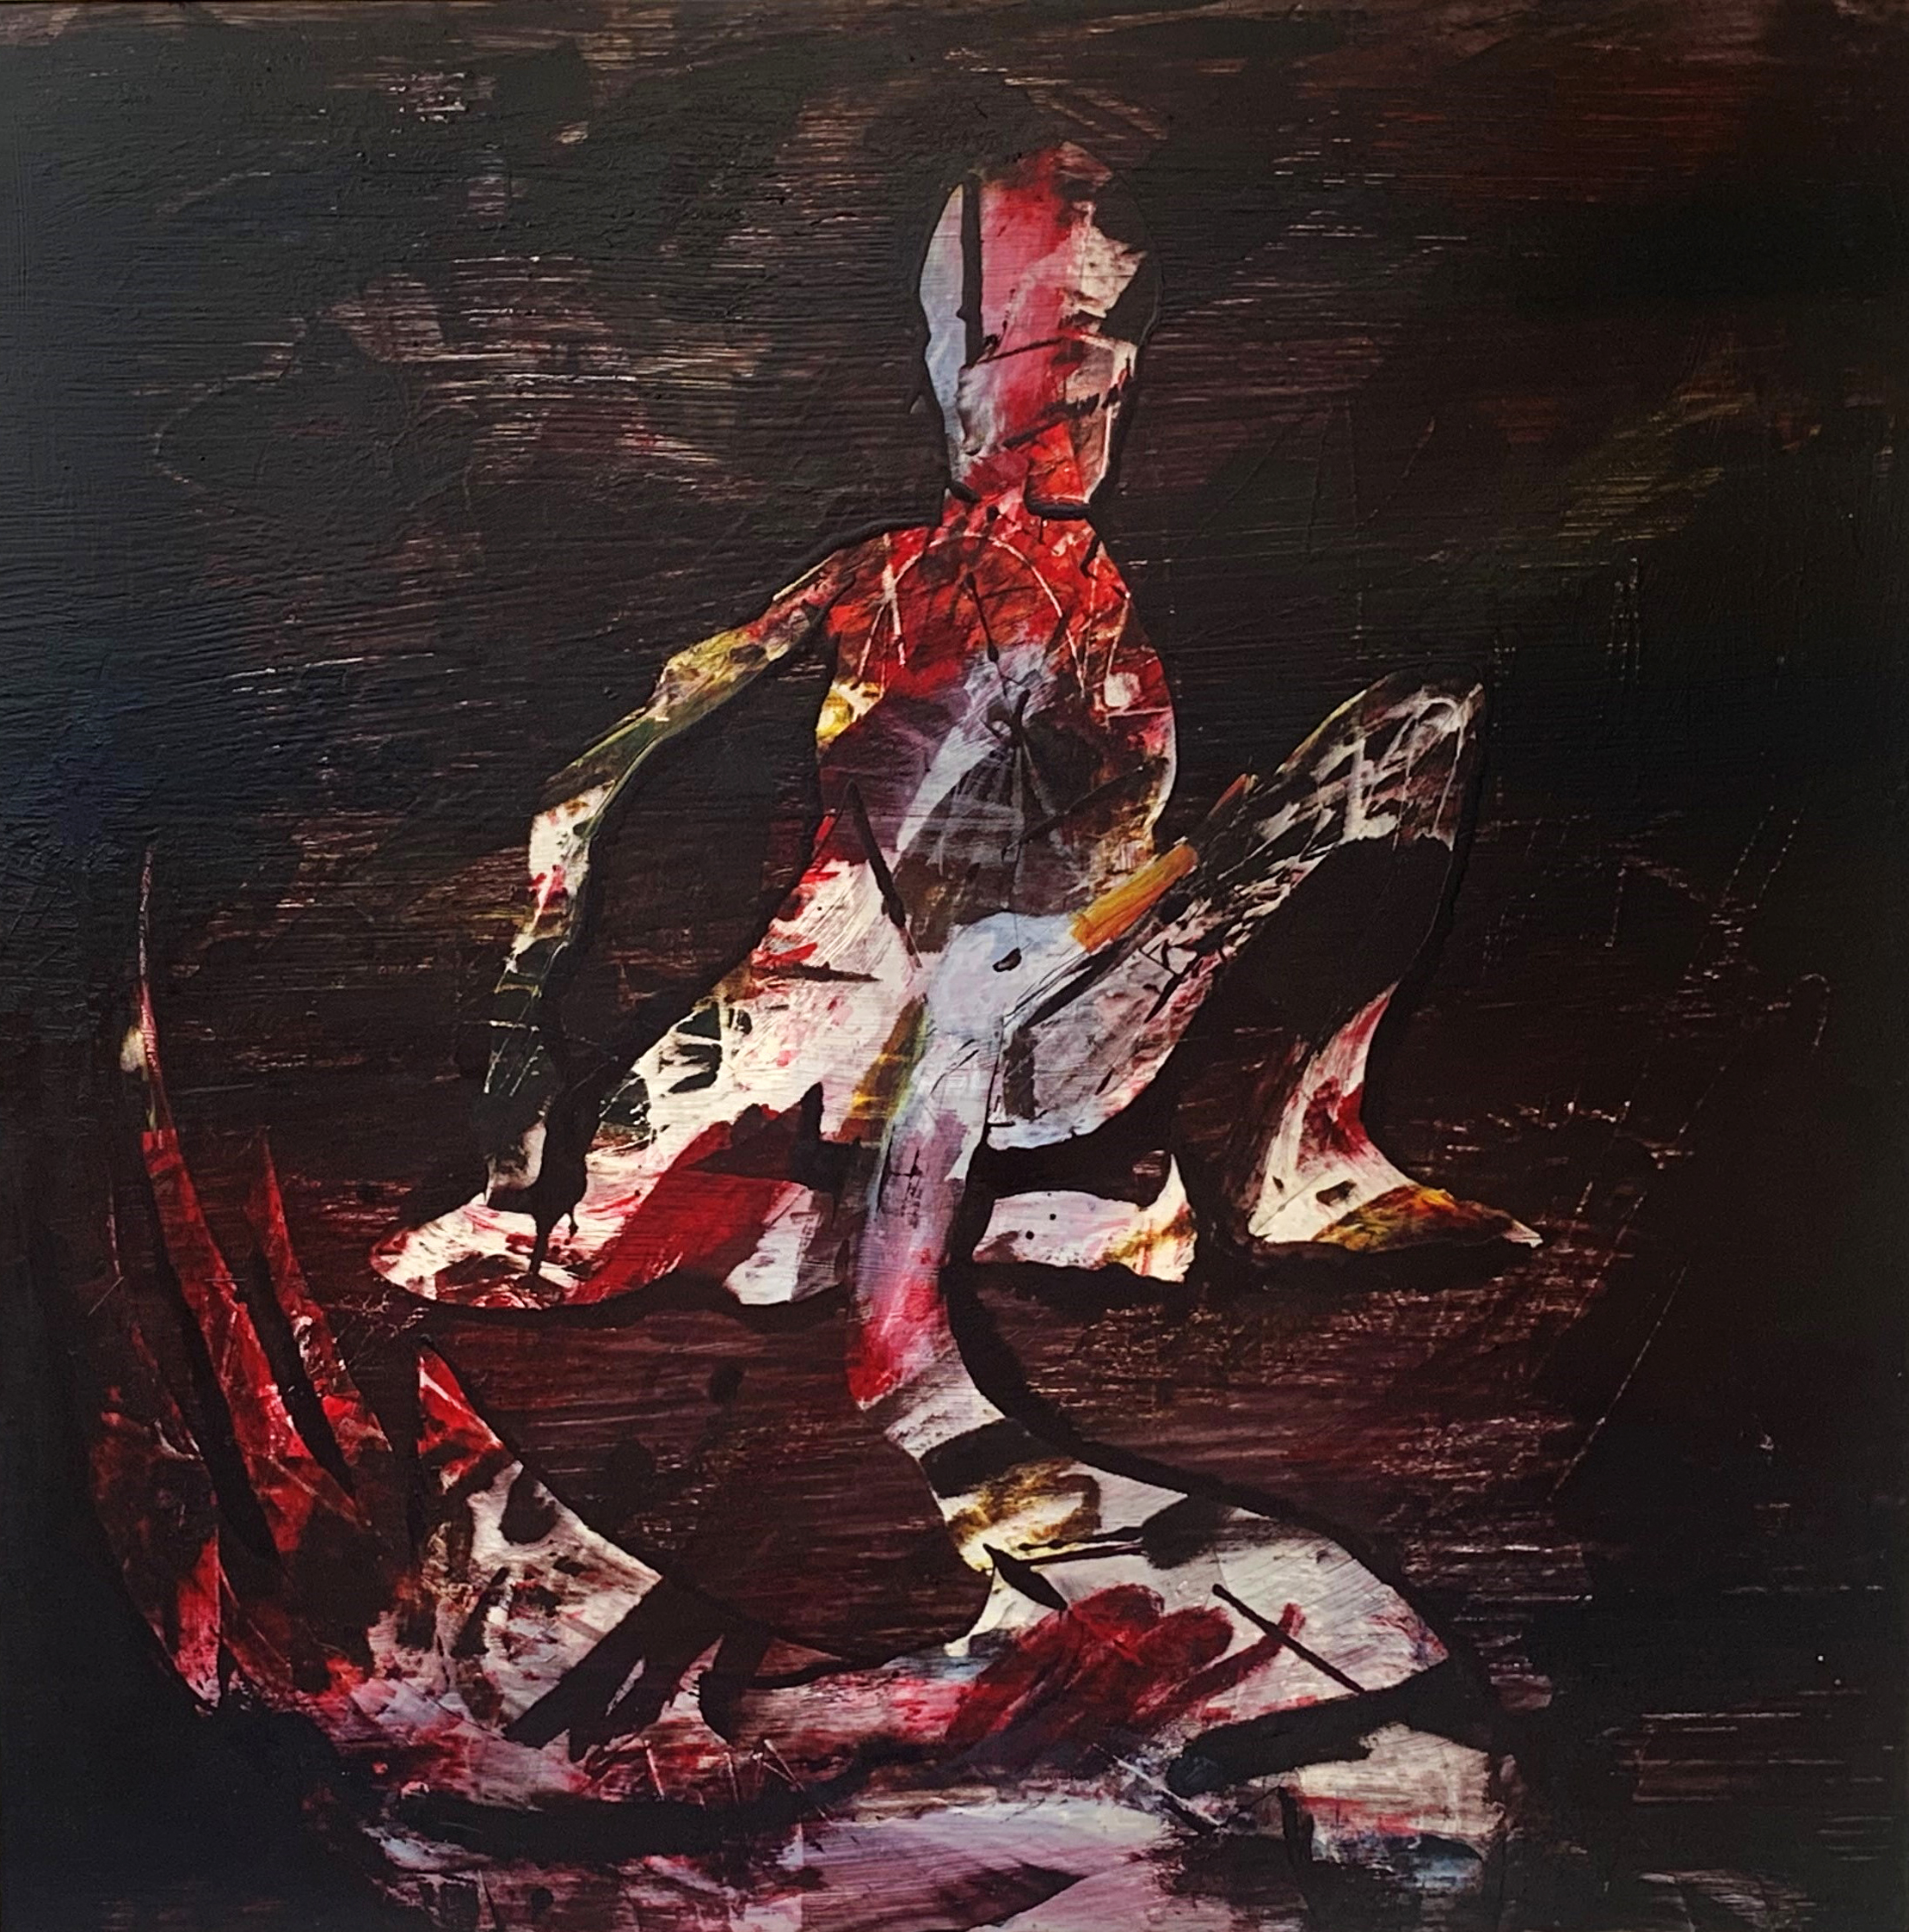 Sidney Nolan, 'Leda and the Swan',1960, polyvinyl acetate on board, 120 x 120cm, $95,000 | Provenance: Private Collection, Sydney; Purchased Gould Galleries, Melbourne; Exhibited Matthieson Gallery, London, (1960).